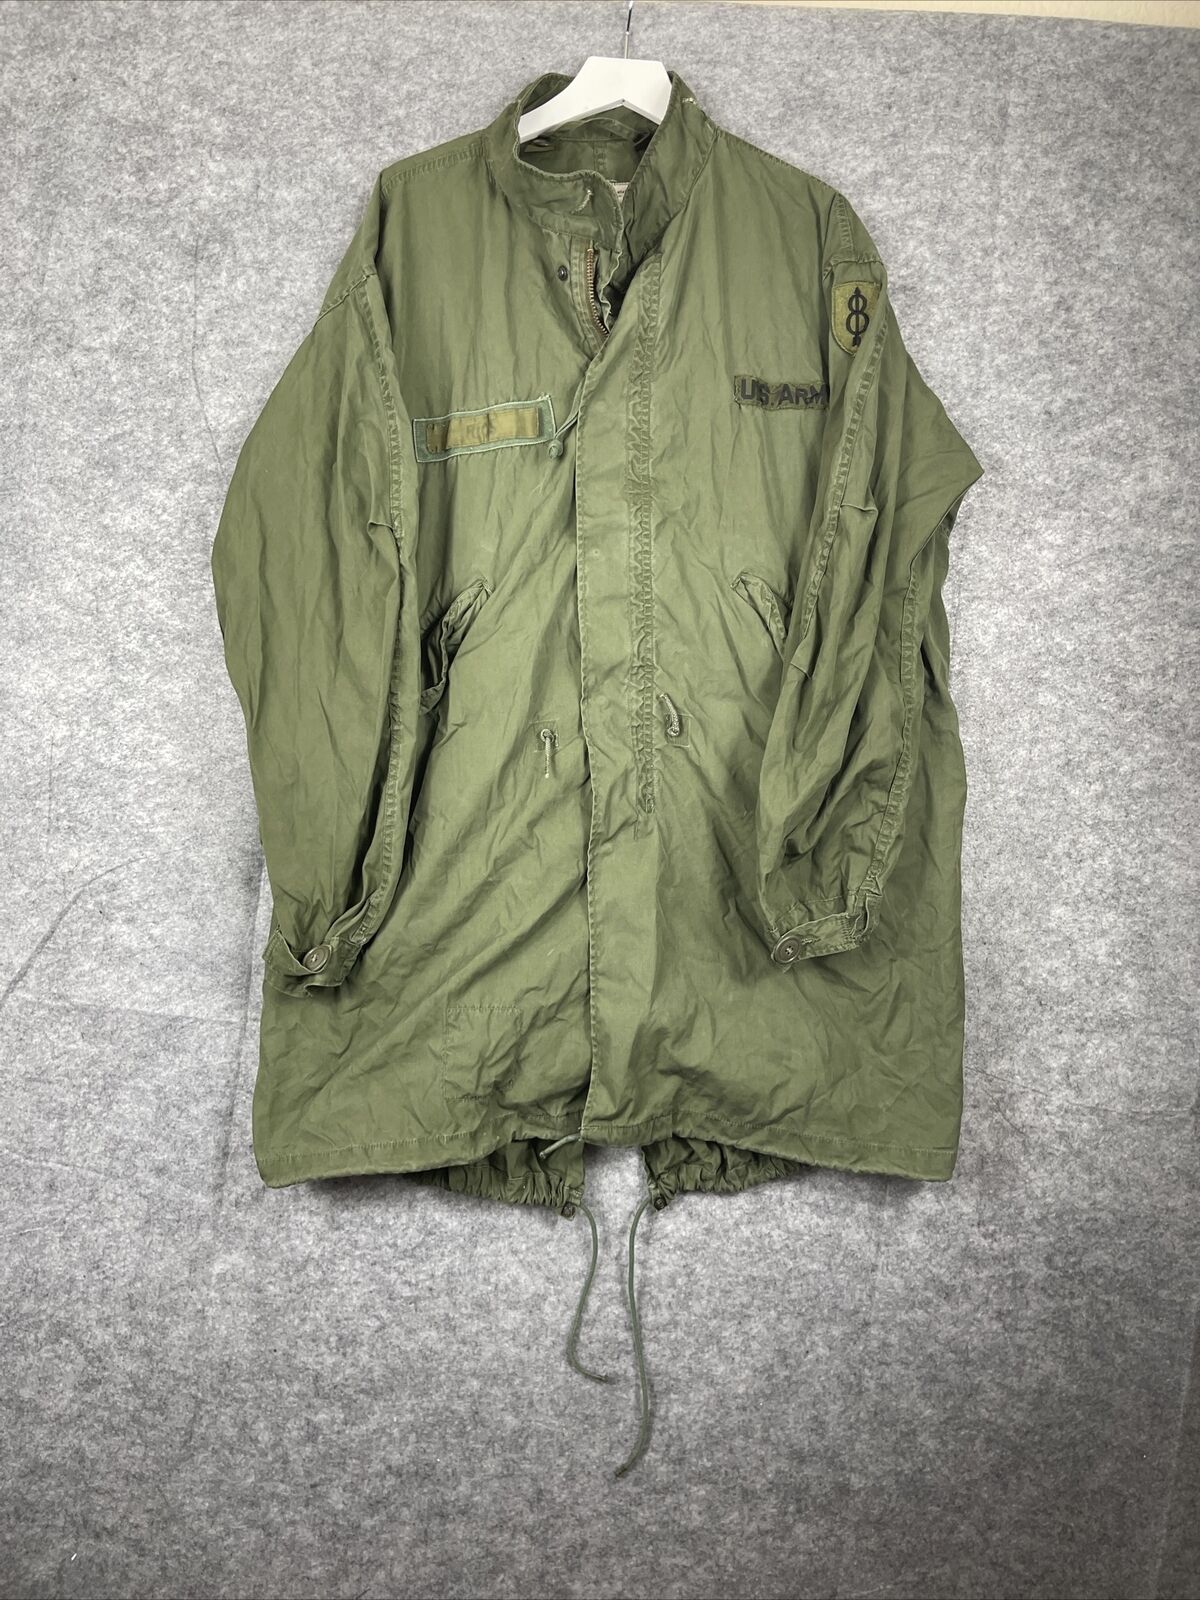 Vintage US Army Fishtail Parka For Extreme Cold 8th Infantry Unit Medium-Regular